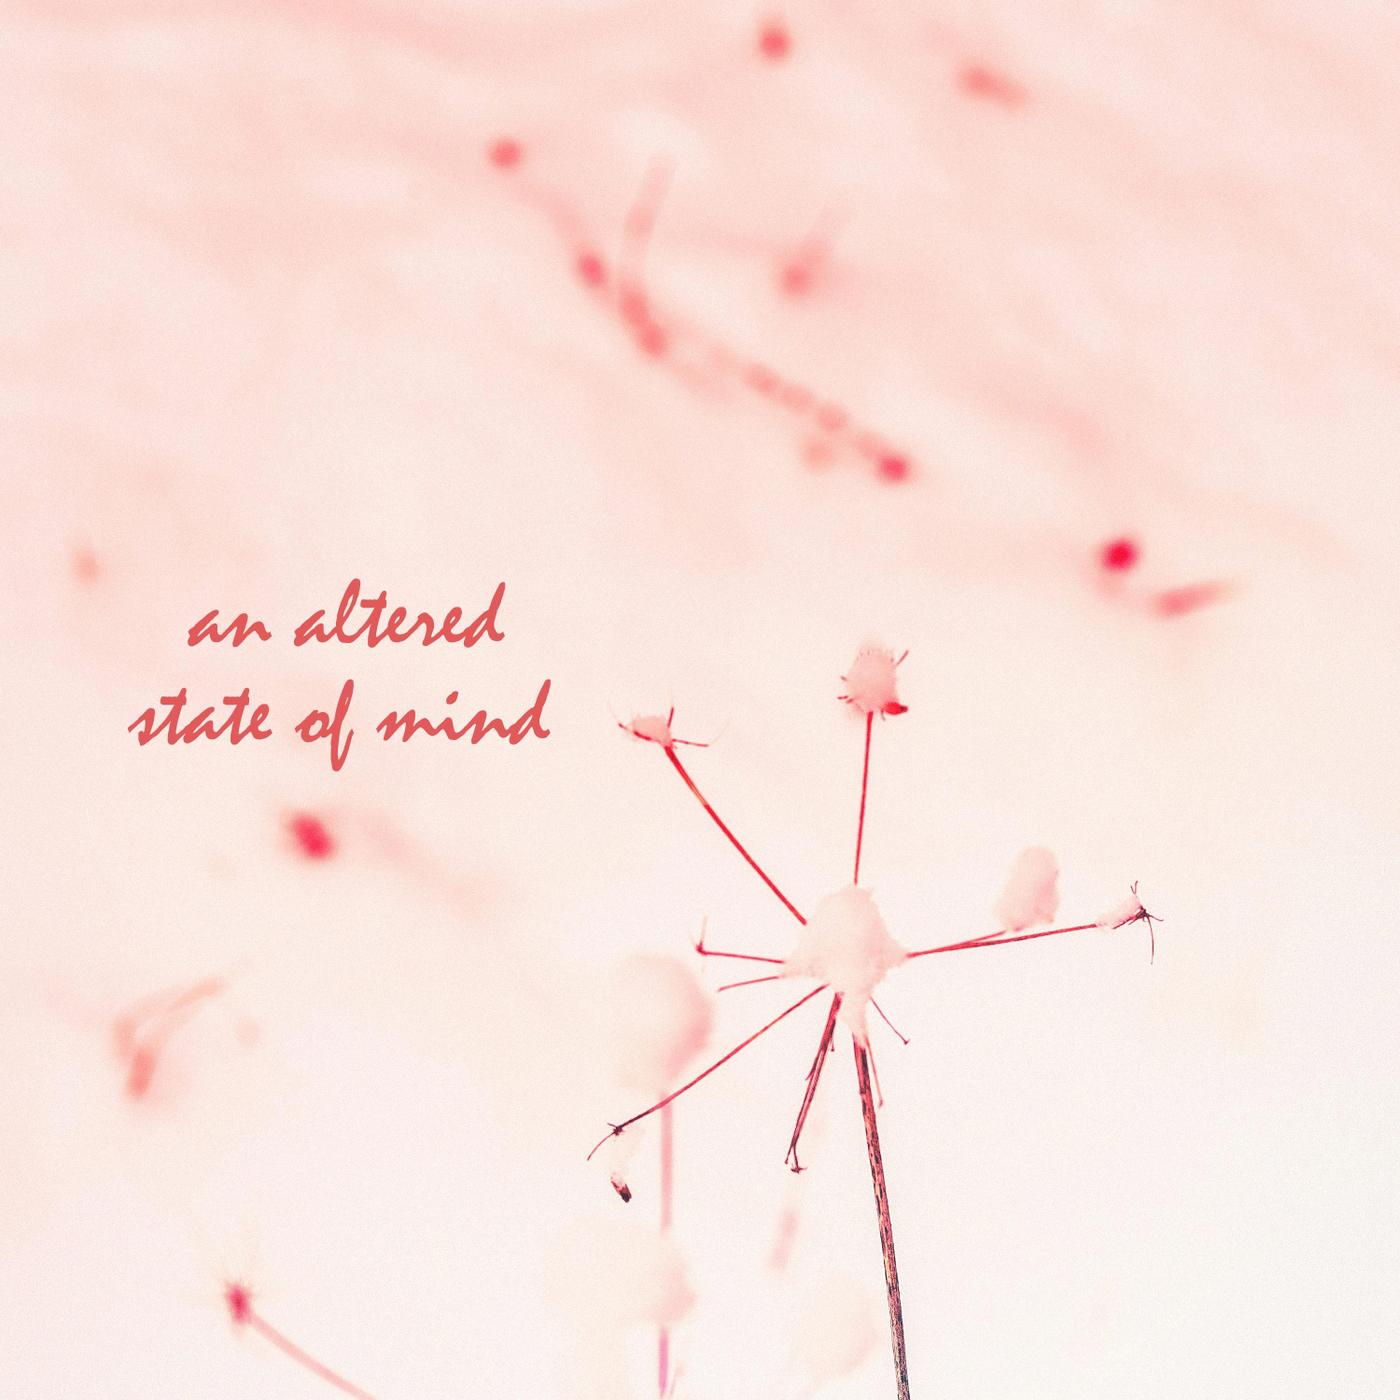 An Altered State of Mind